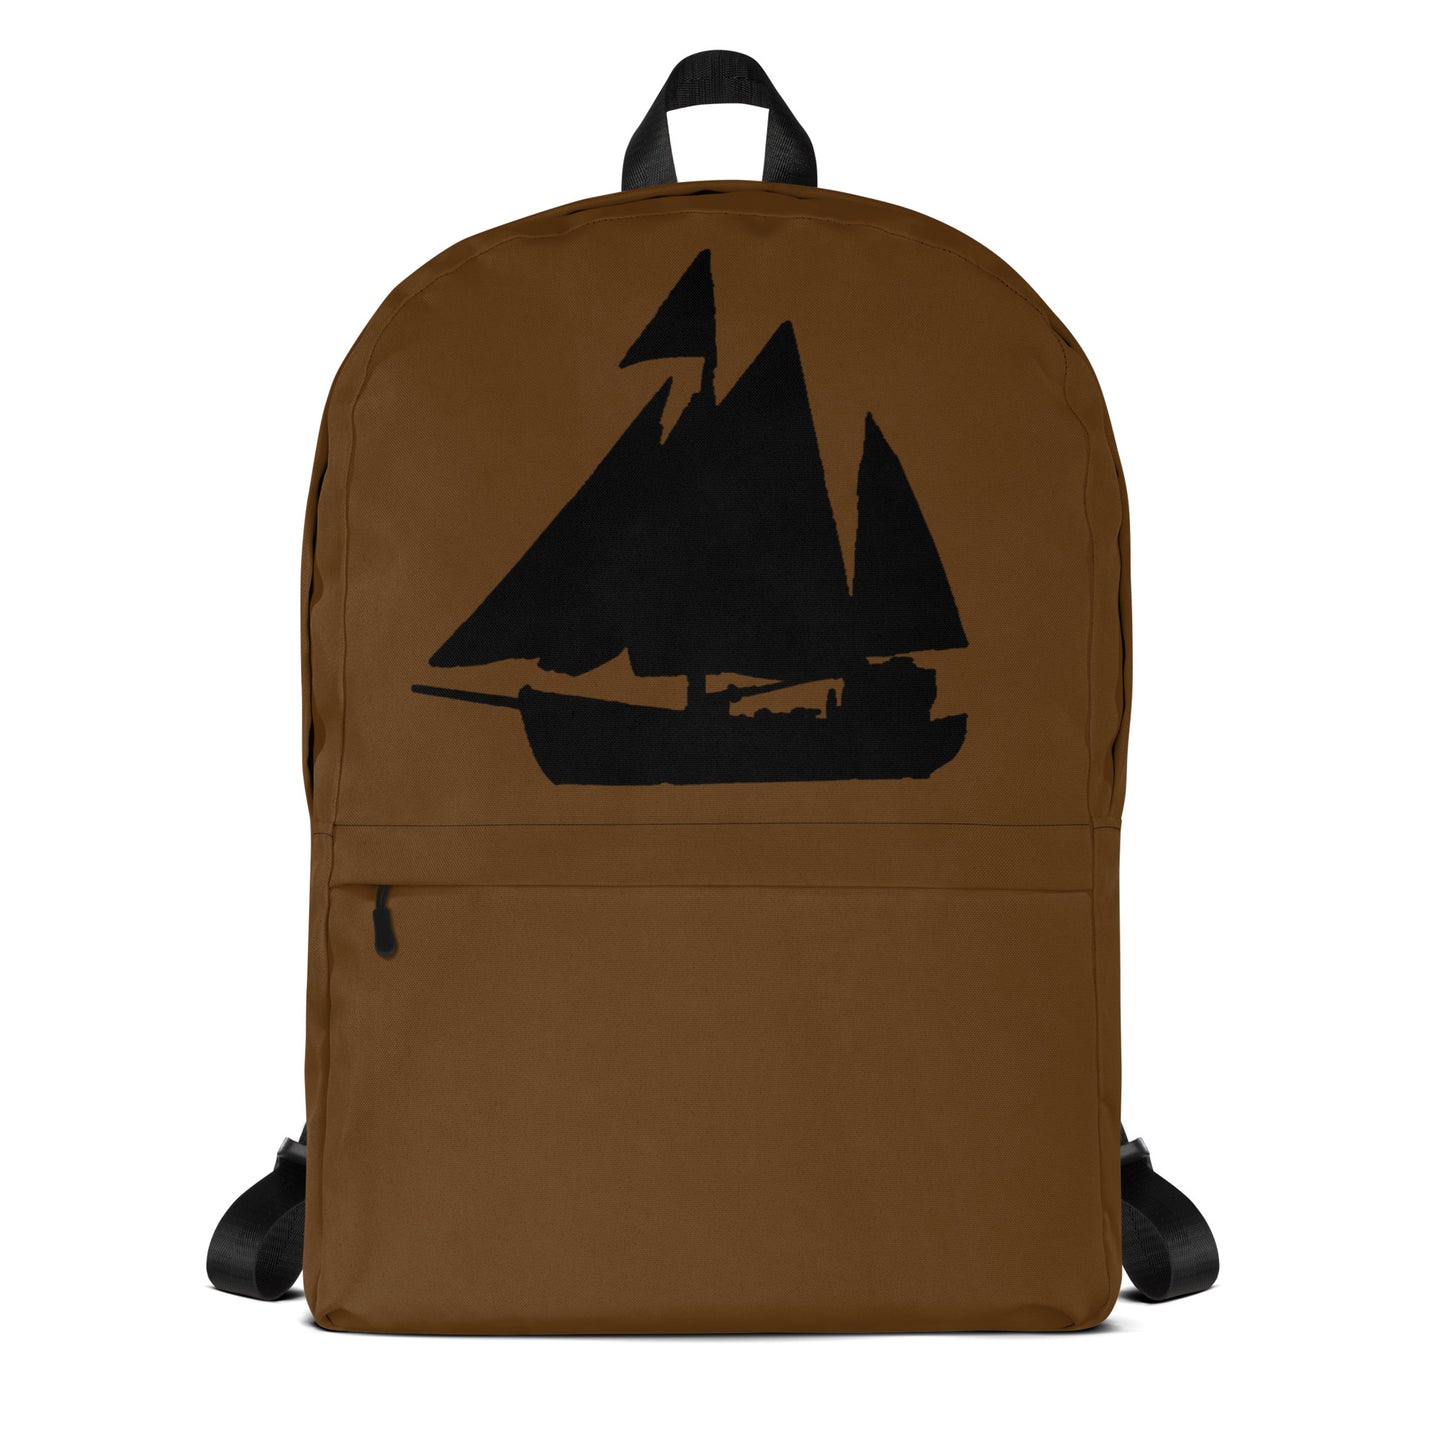 Tall ship backpack